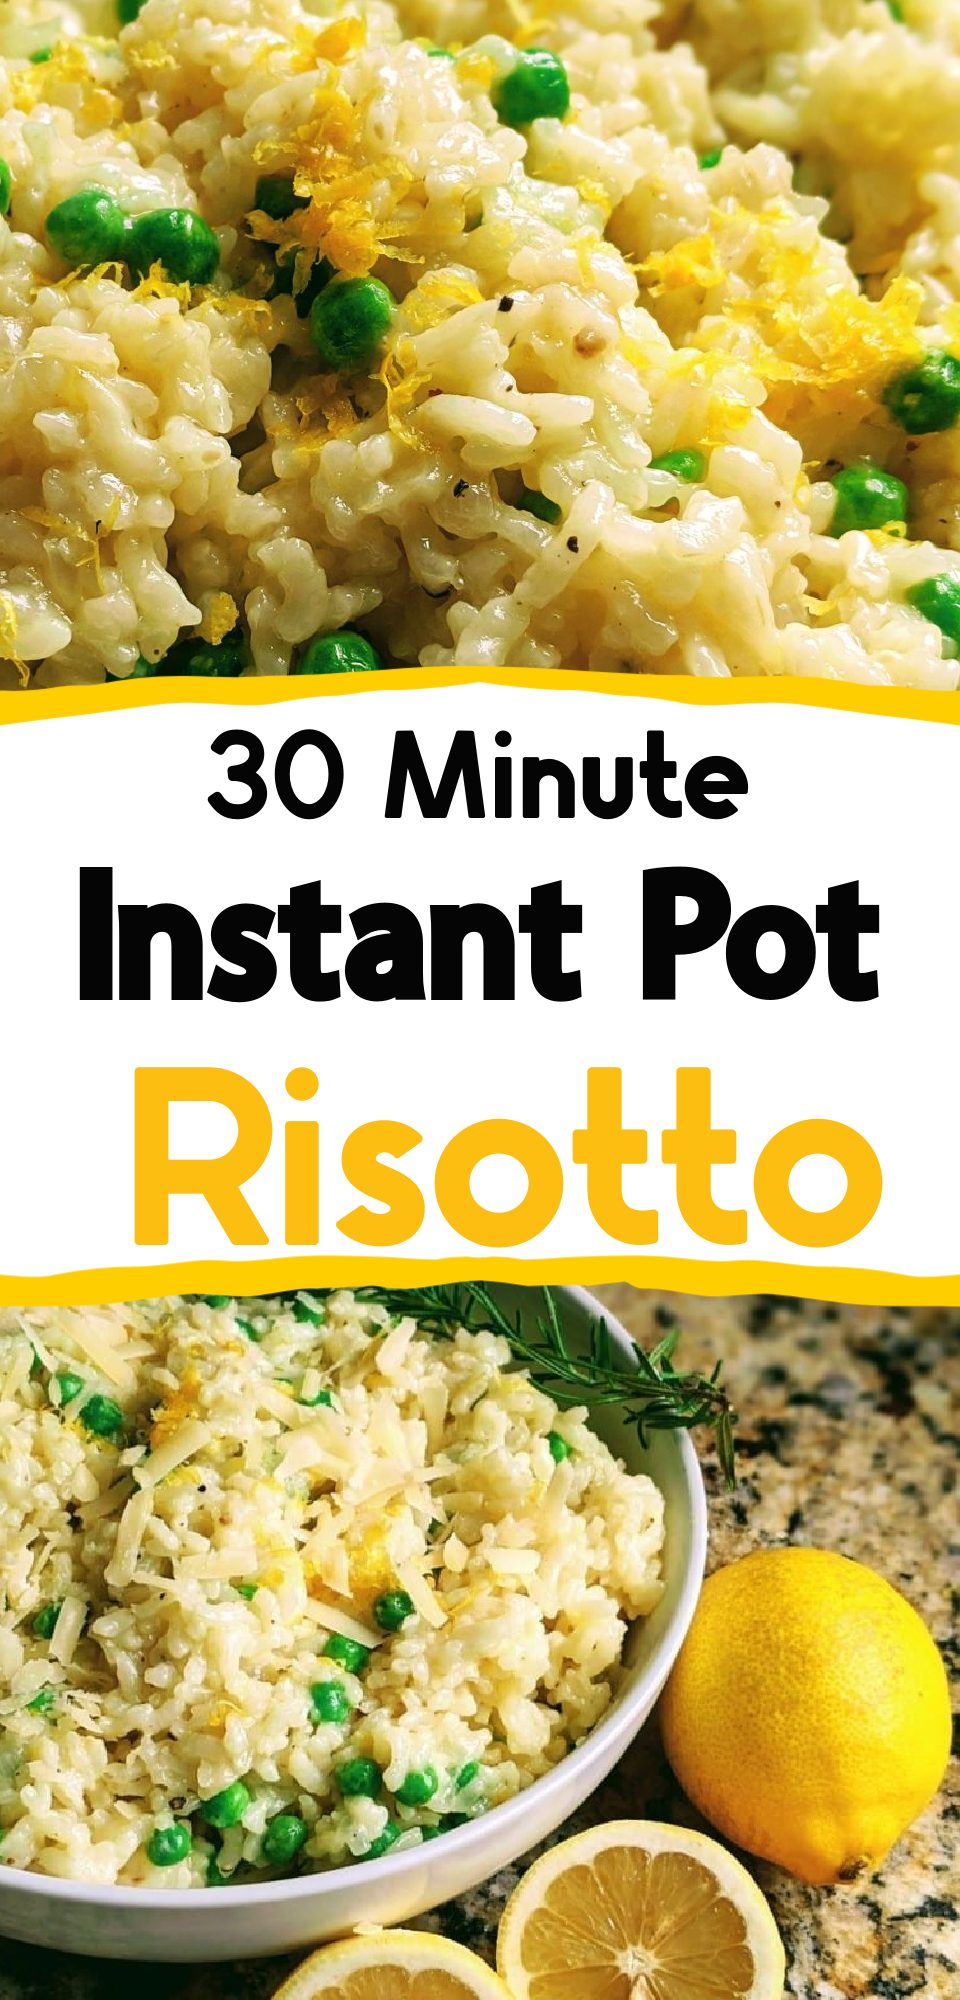 Risotto has never been easier! This Instant Pot Risotto recipe can be made in under 30 minutes and comes with so much versatility in customizing it for your preferences.